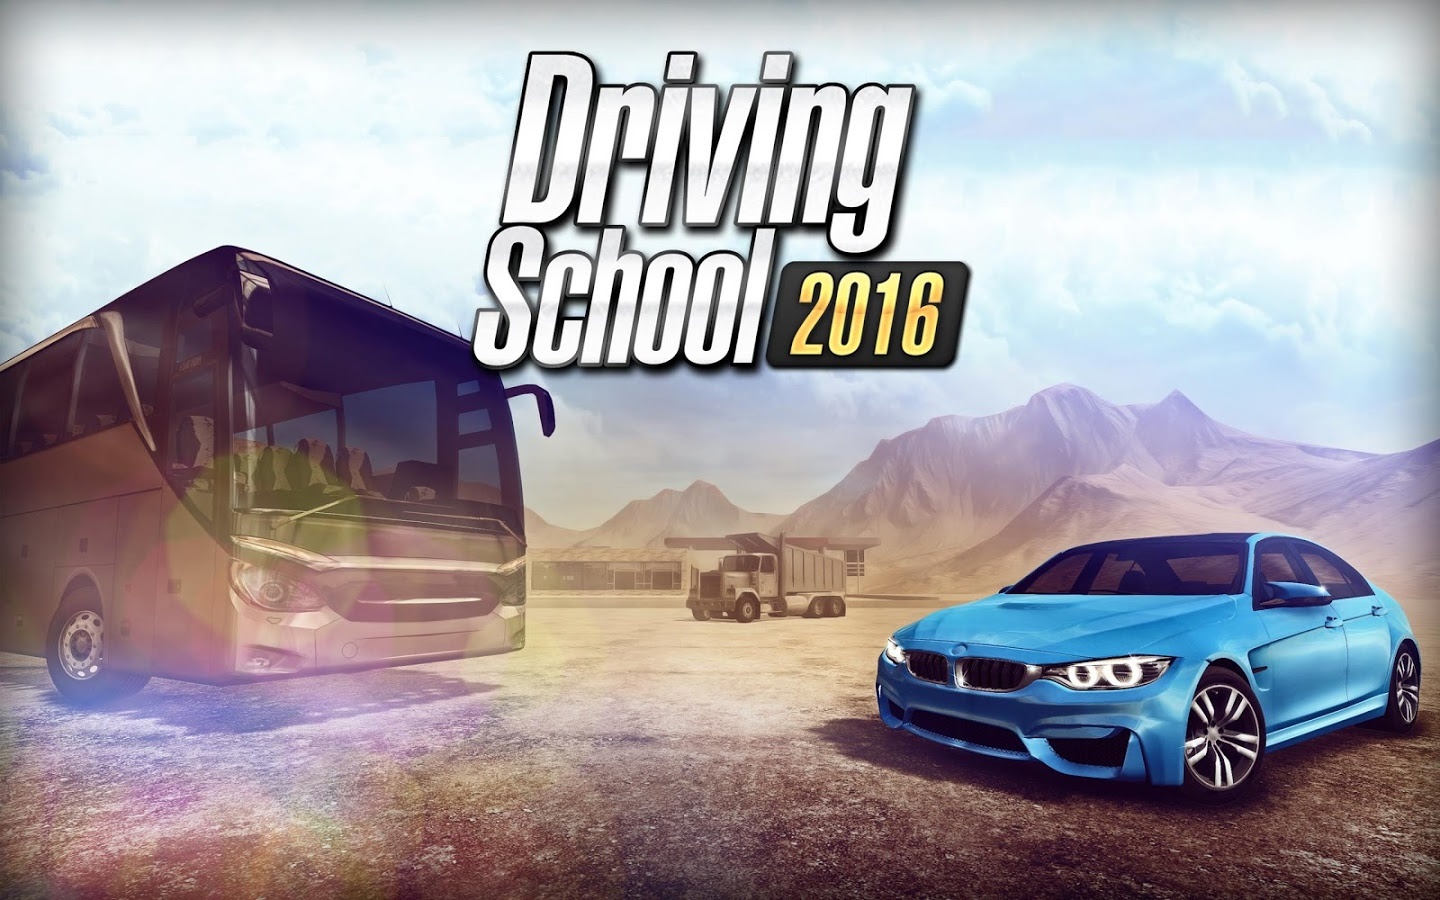 Driving School 2016 Android Game APK by